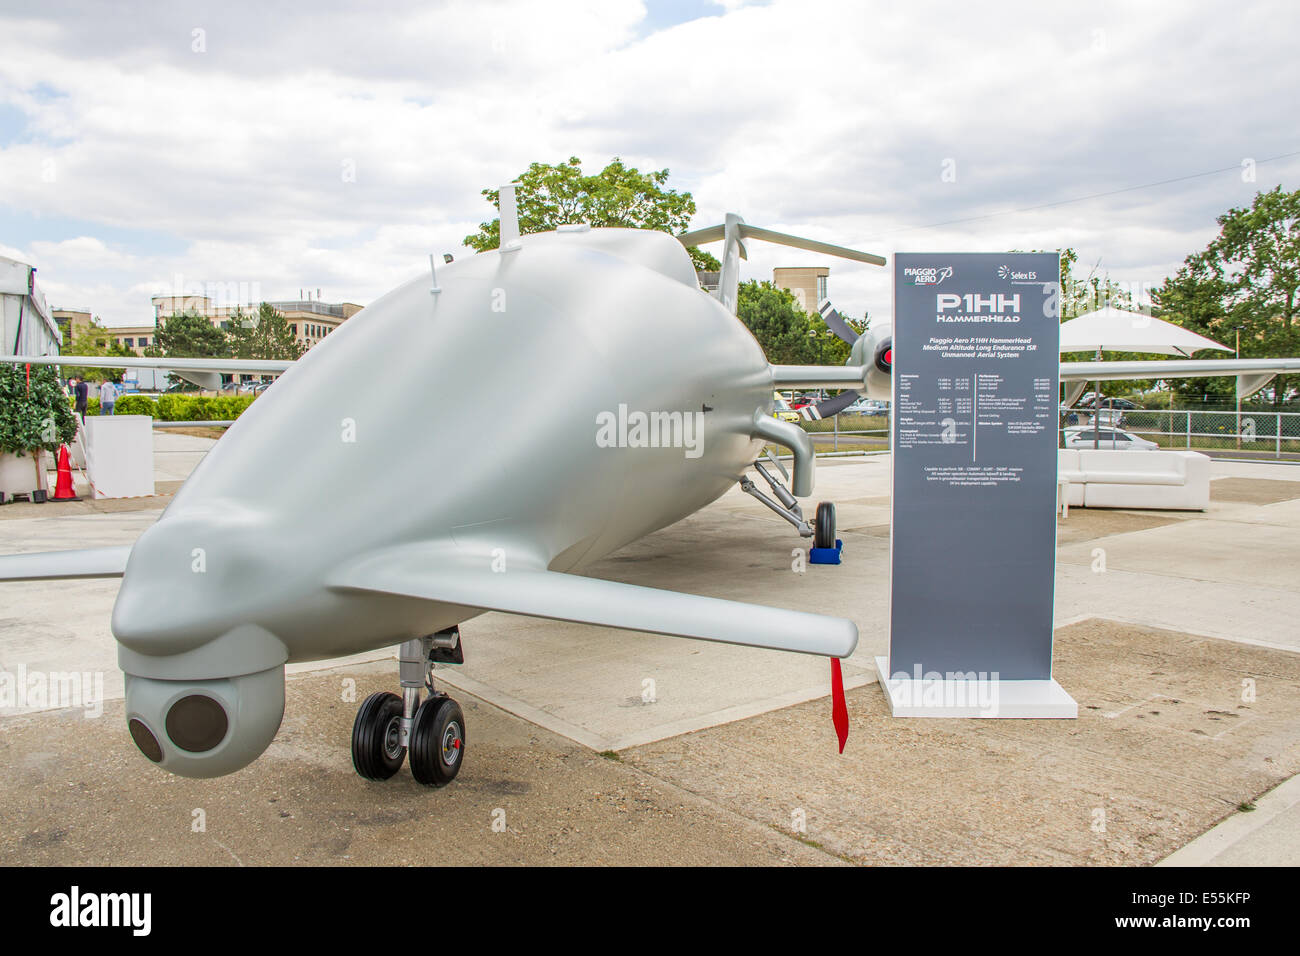 The P.1HH HammerHead unmanned aerial vehicle (UAV) in development with  Piaggio Farnborough International Air Show July 15th 2014 Stock Photo -  Alamy